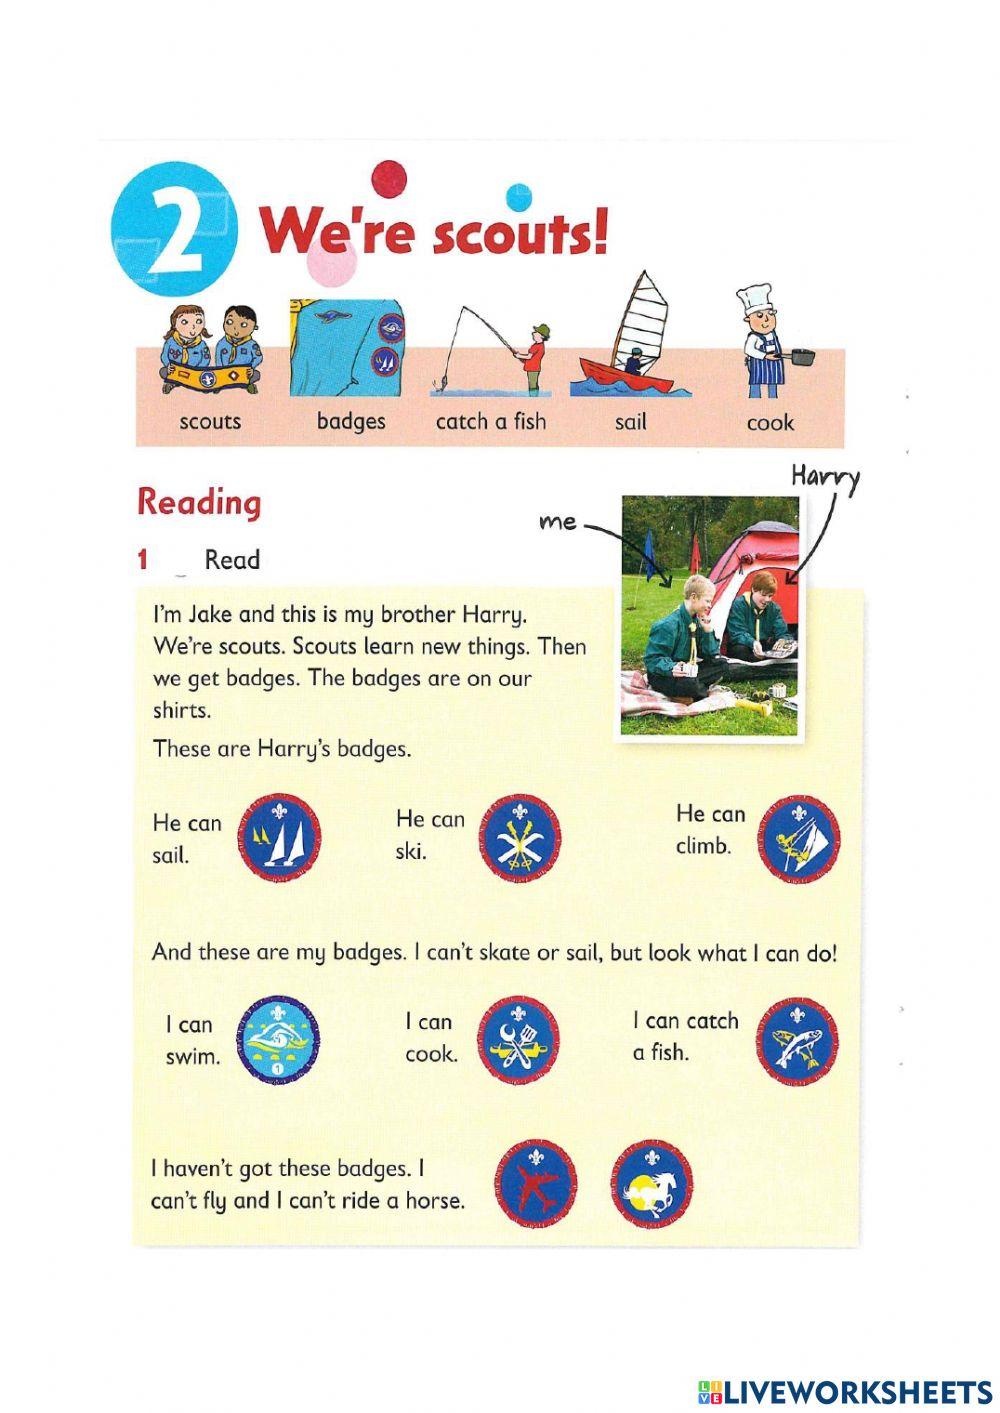 Reading and writing - we-re scouts